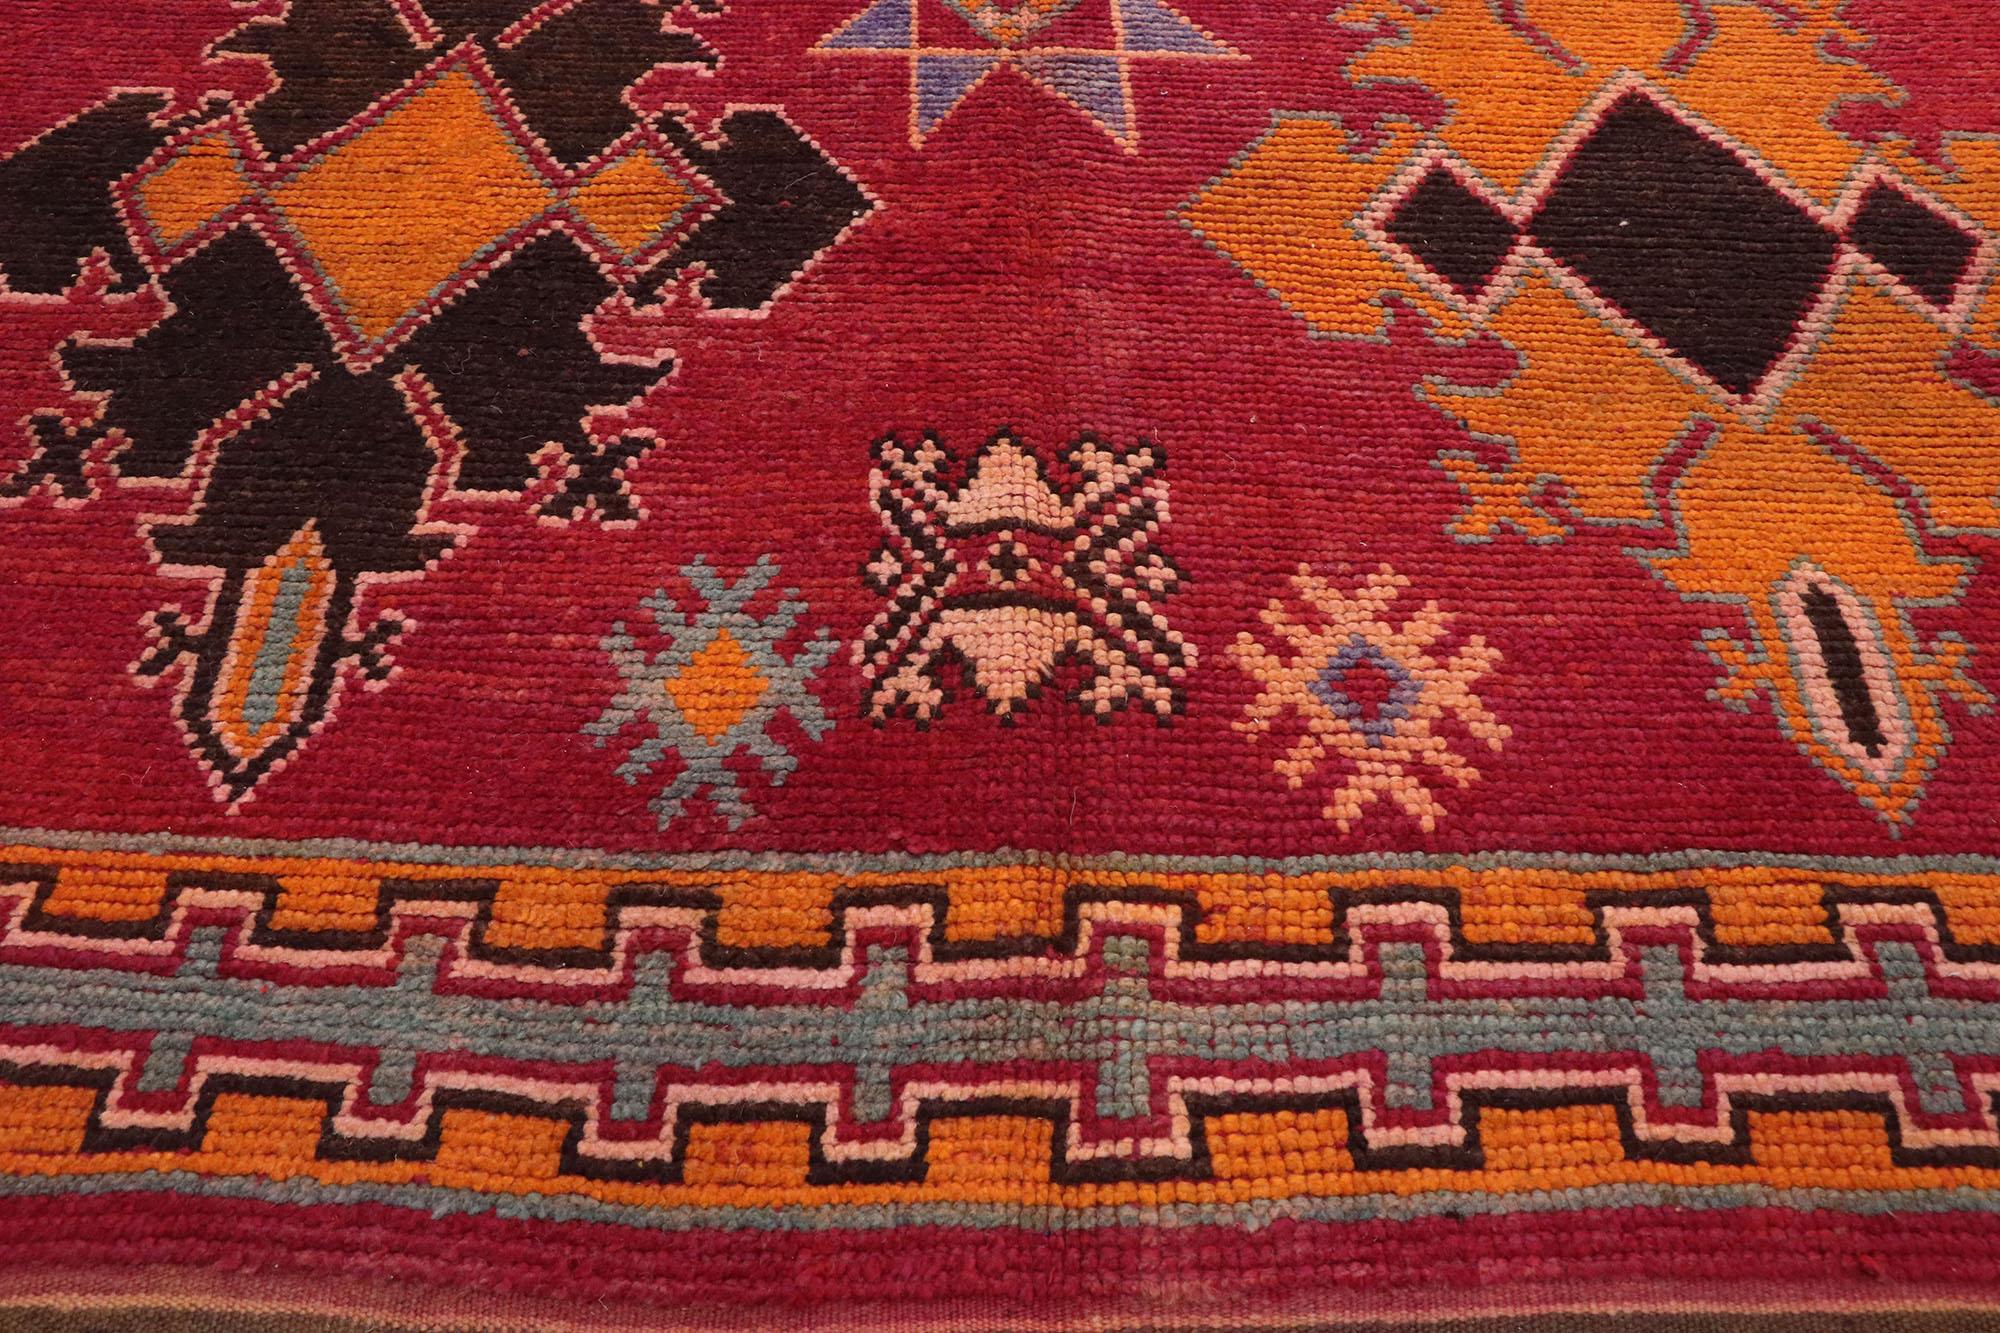 Hand-Knotted Vintage Red Boujad Moroccan Rug, Boho Chic Meets Worldly Sophistication